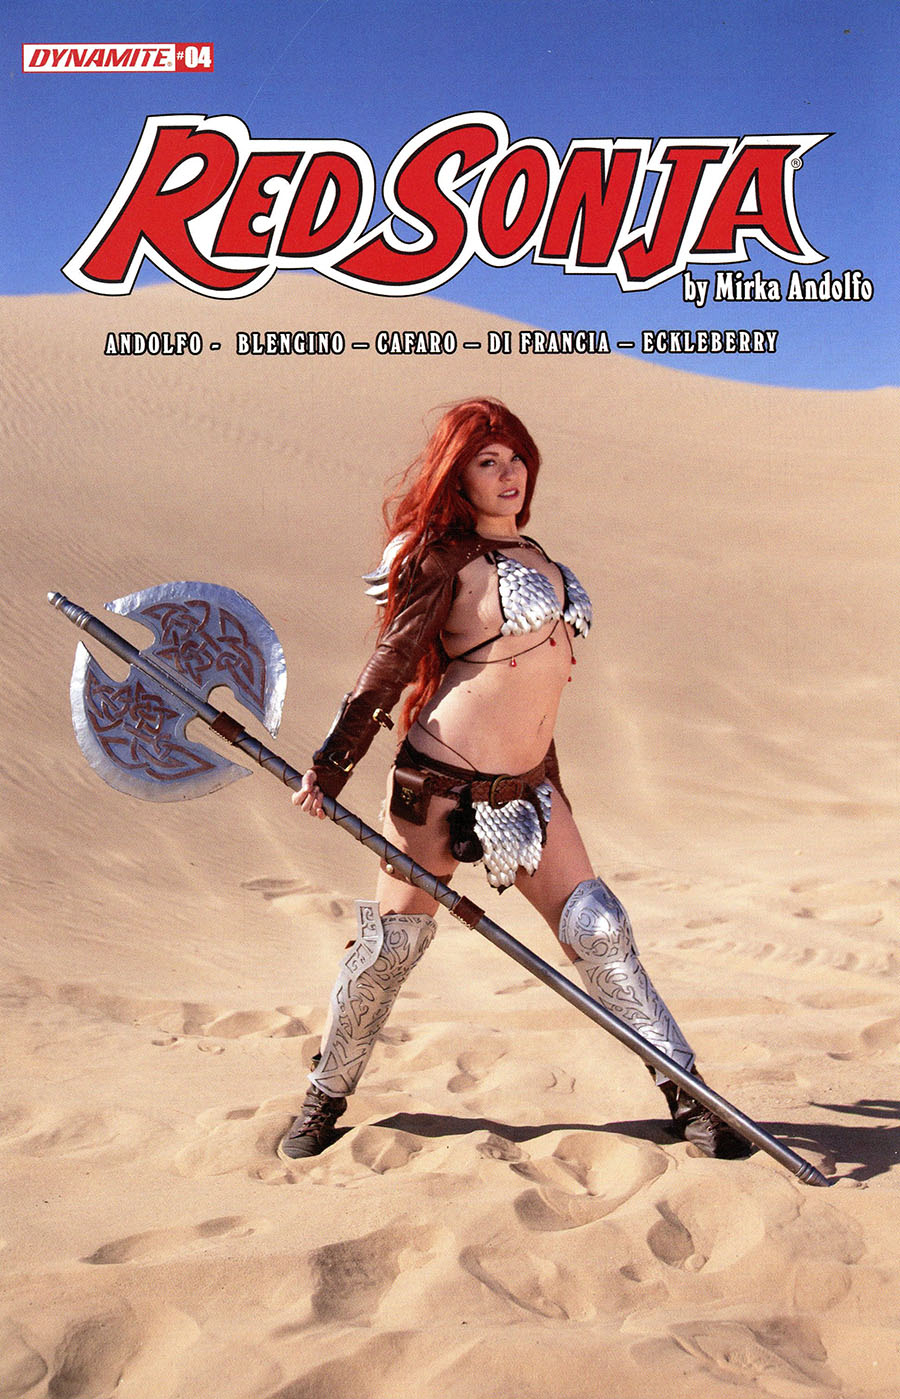 Red Sonja Vol 9 #4 Cover E Variant Tabitha Lyons Cosplay Photo Cover